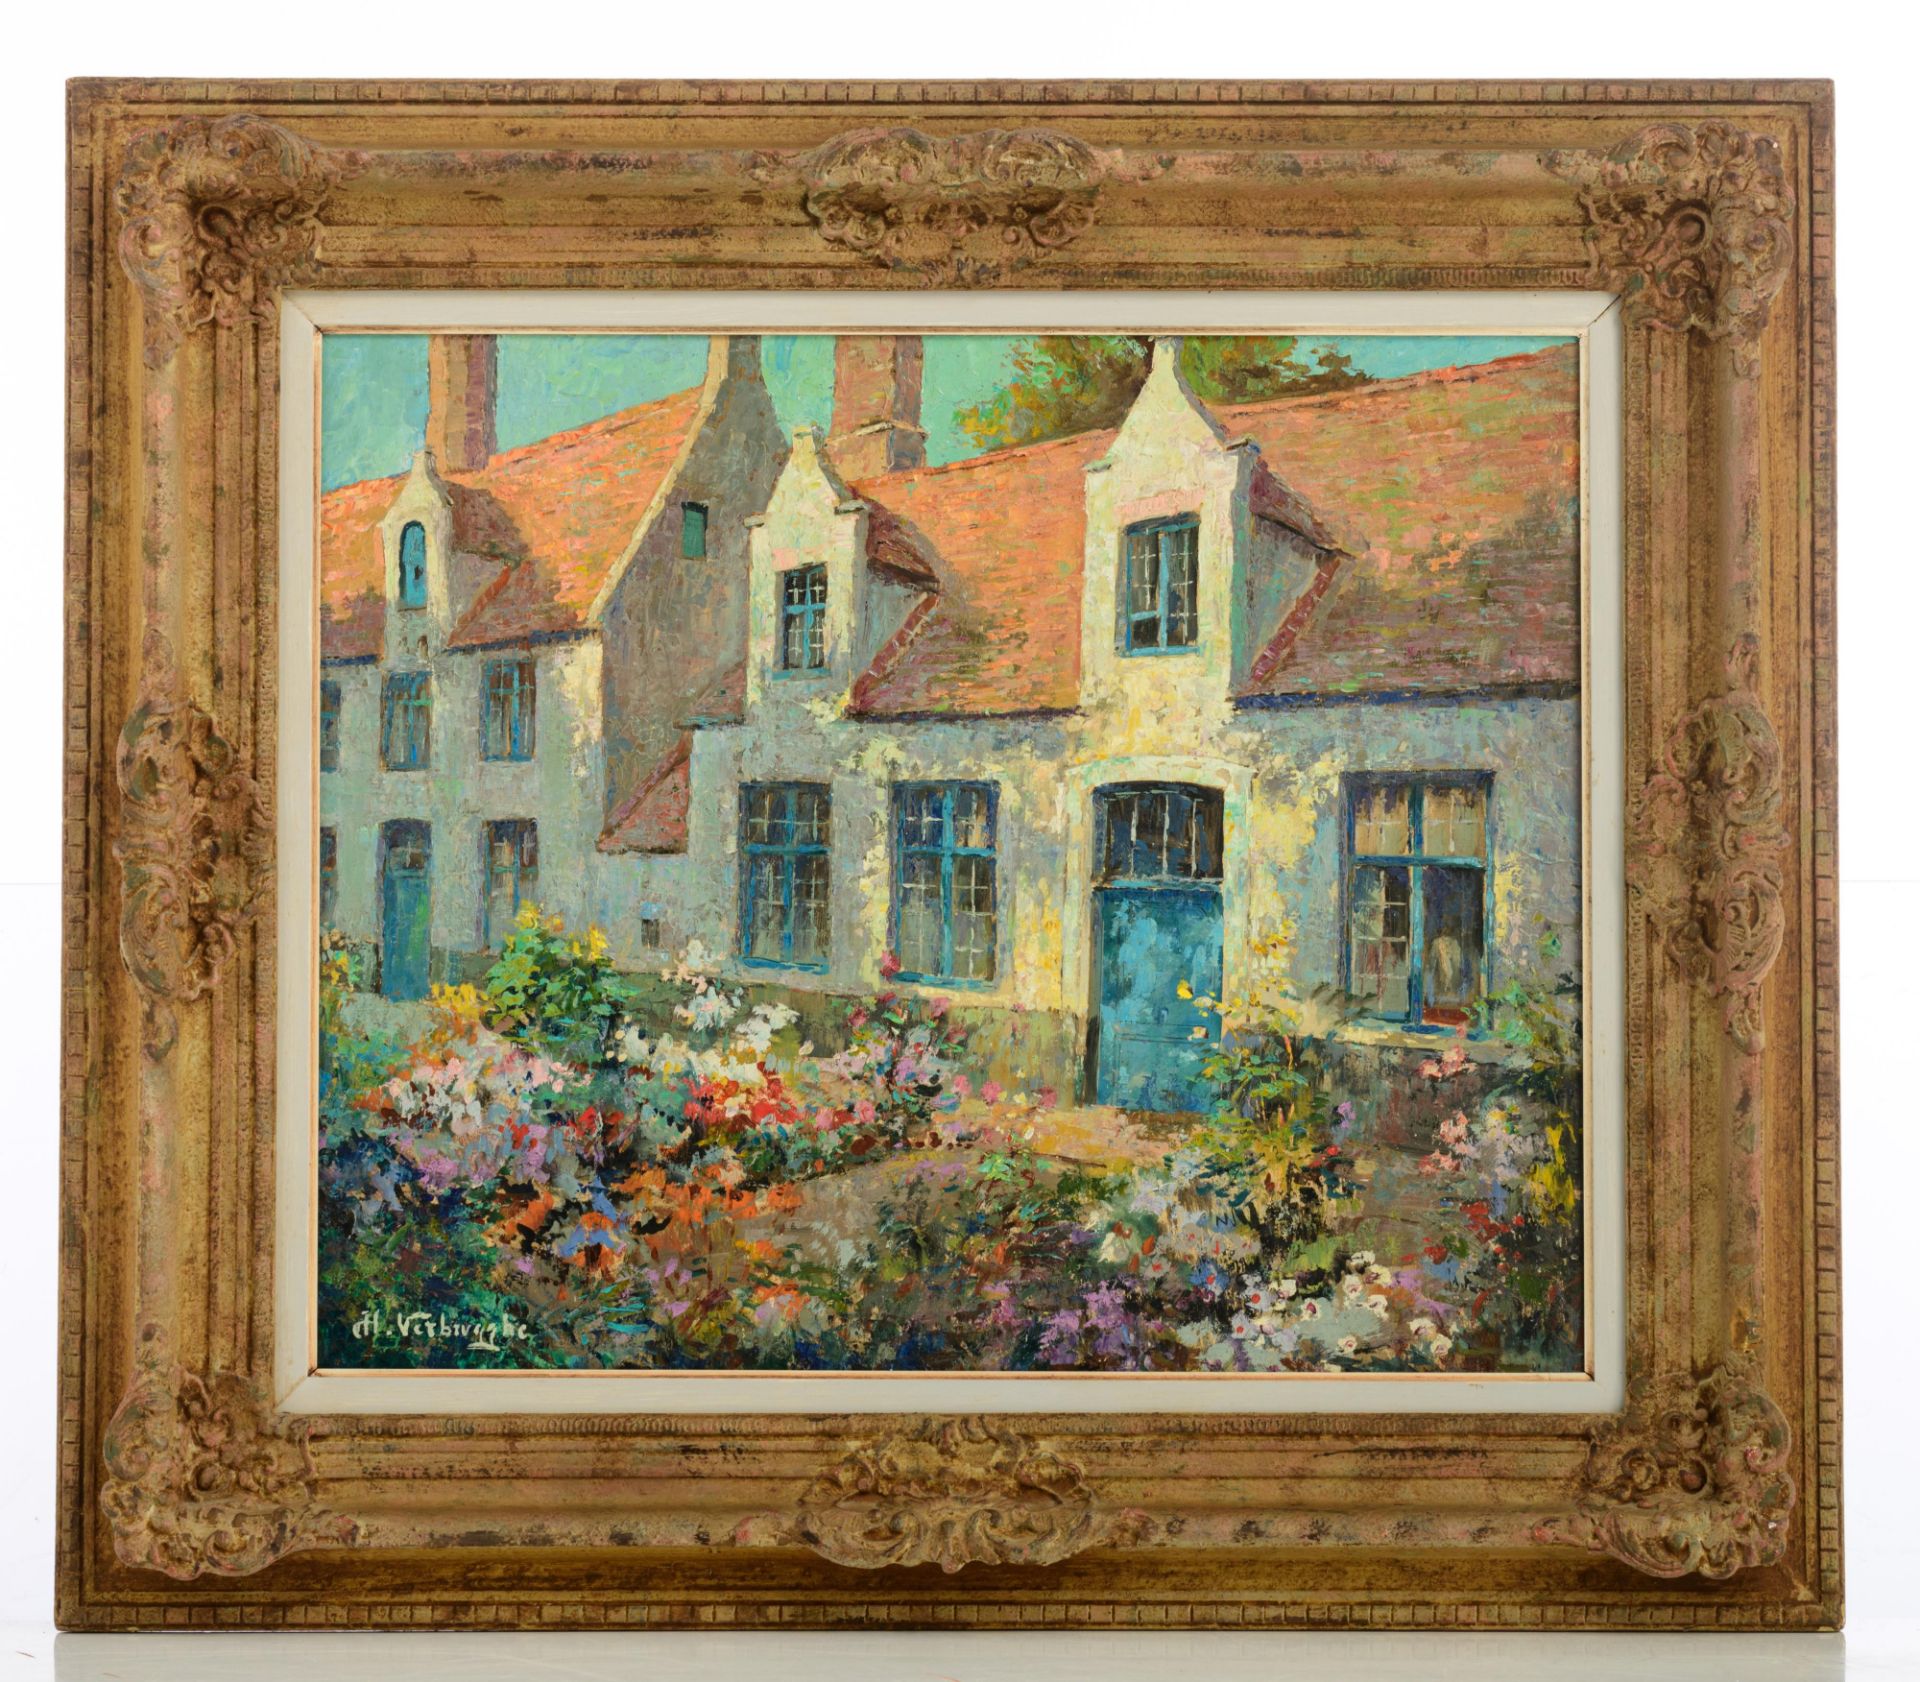 Verbrugghe Ch., a view on the almshouses in summer, oil on triplex, 49 x 59 cm. Added: by the same a - Image 5 of 14